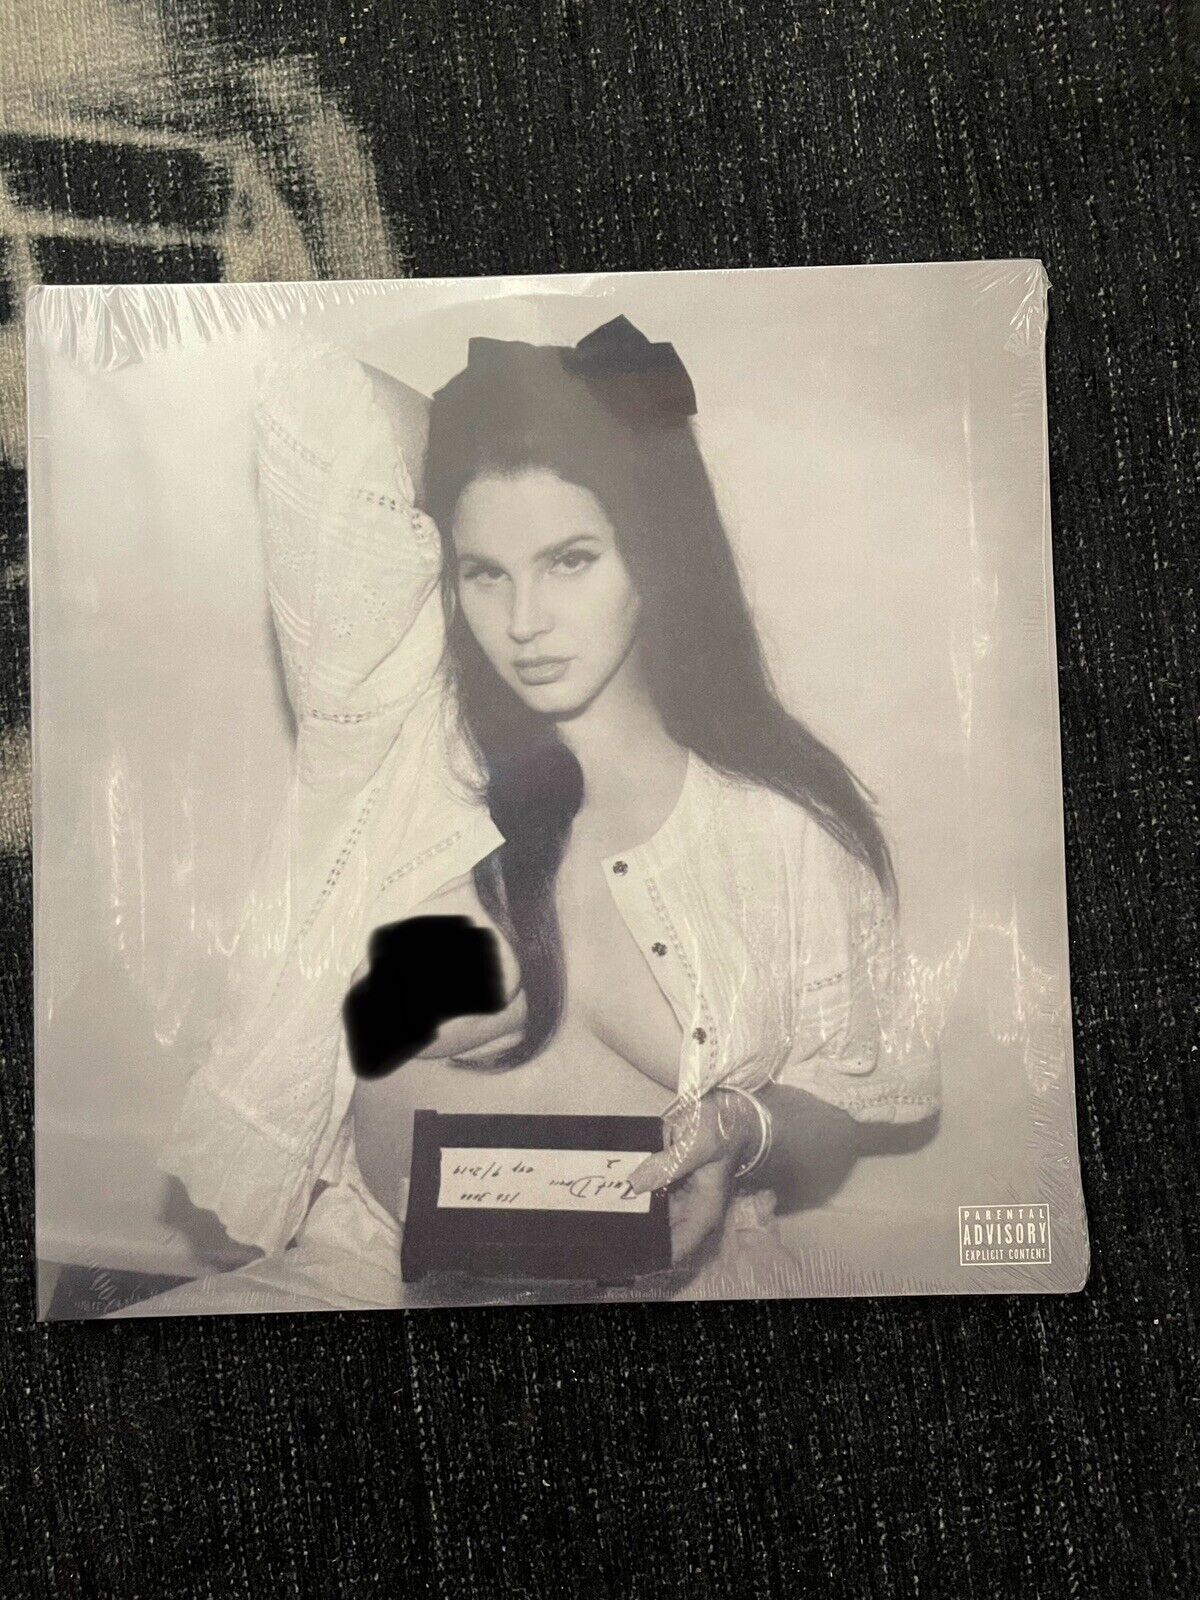 Lana Del Rey Did You Know There\'s Tunnel Alt Art Nude Cover Uncensored Vinyl LP